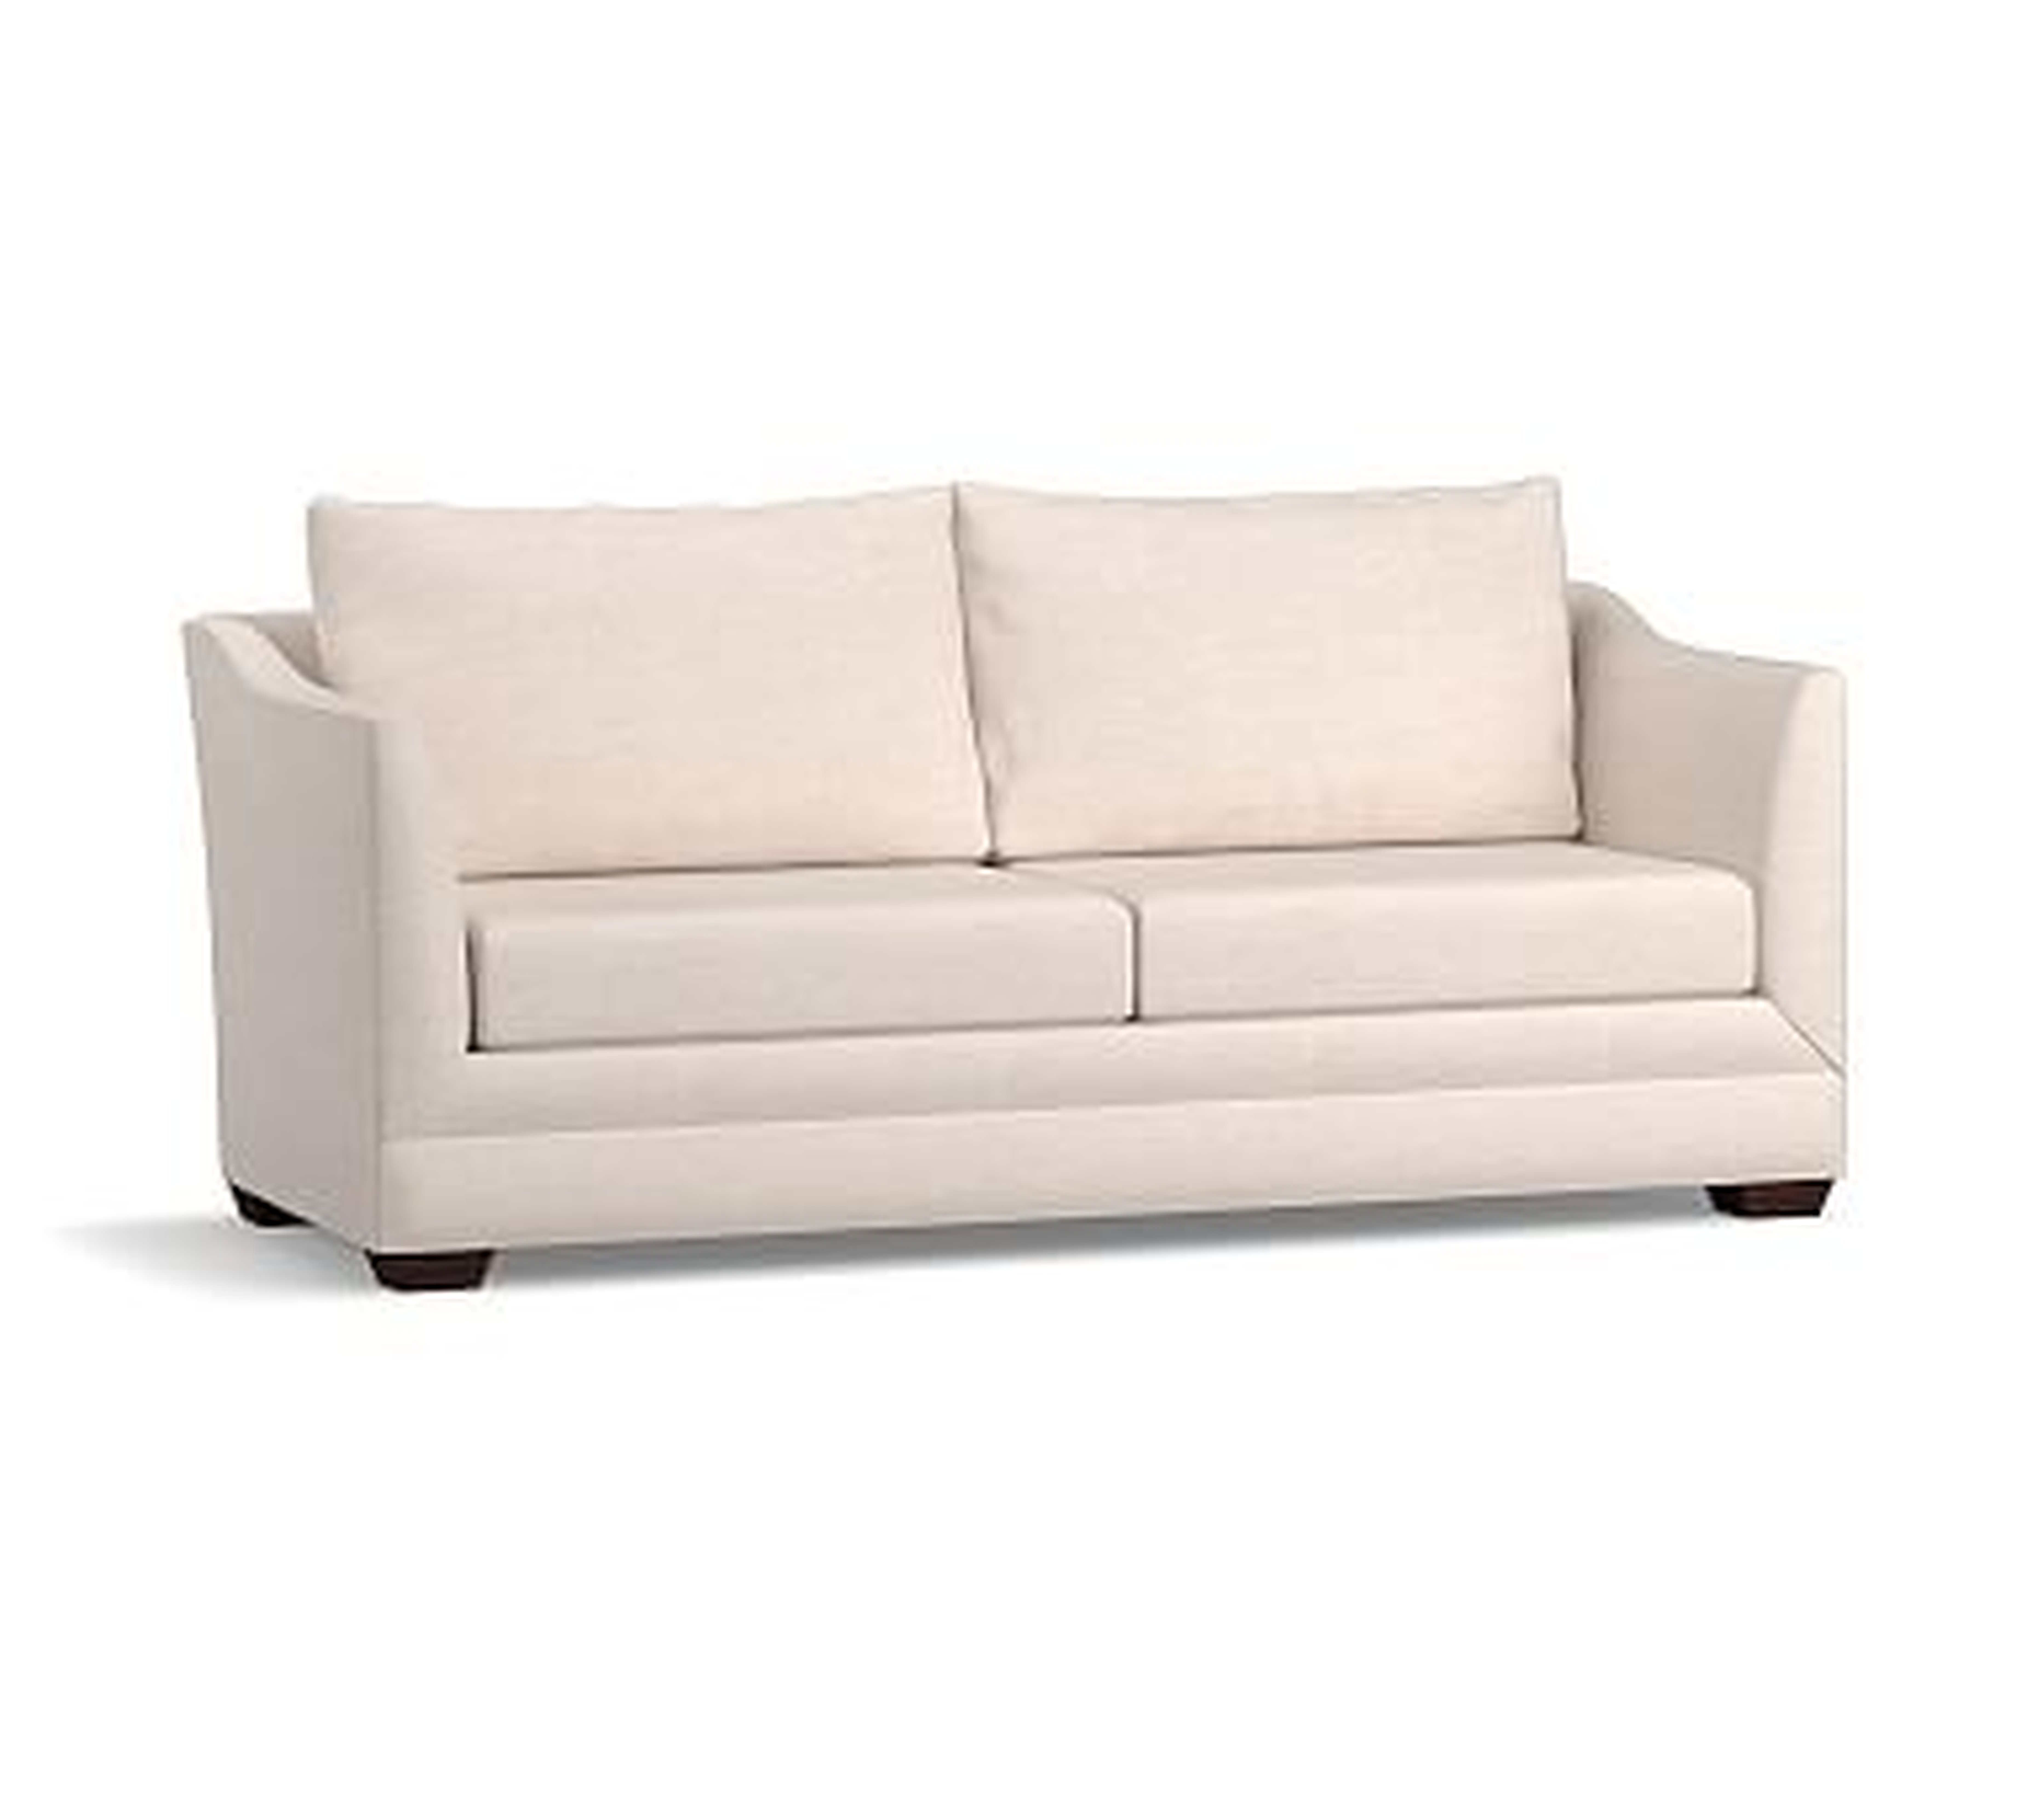 Celeste Upholstered Sofa, Polyester Wrapped Cushions, Performance Twill Warm White - Pottery Barn